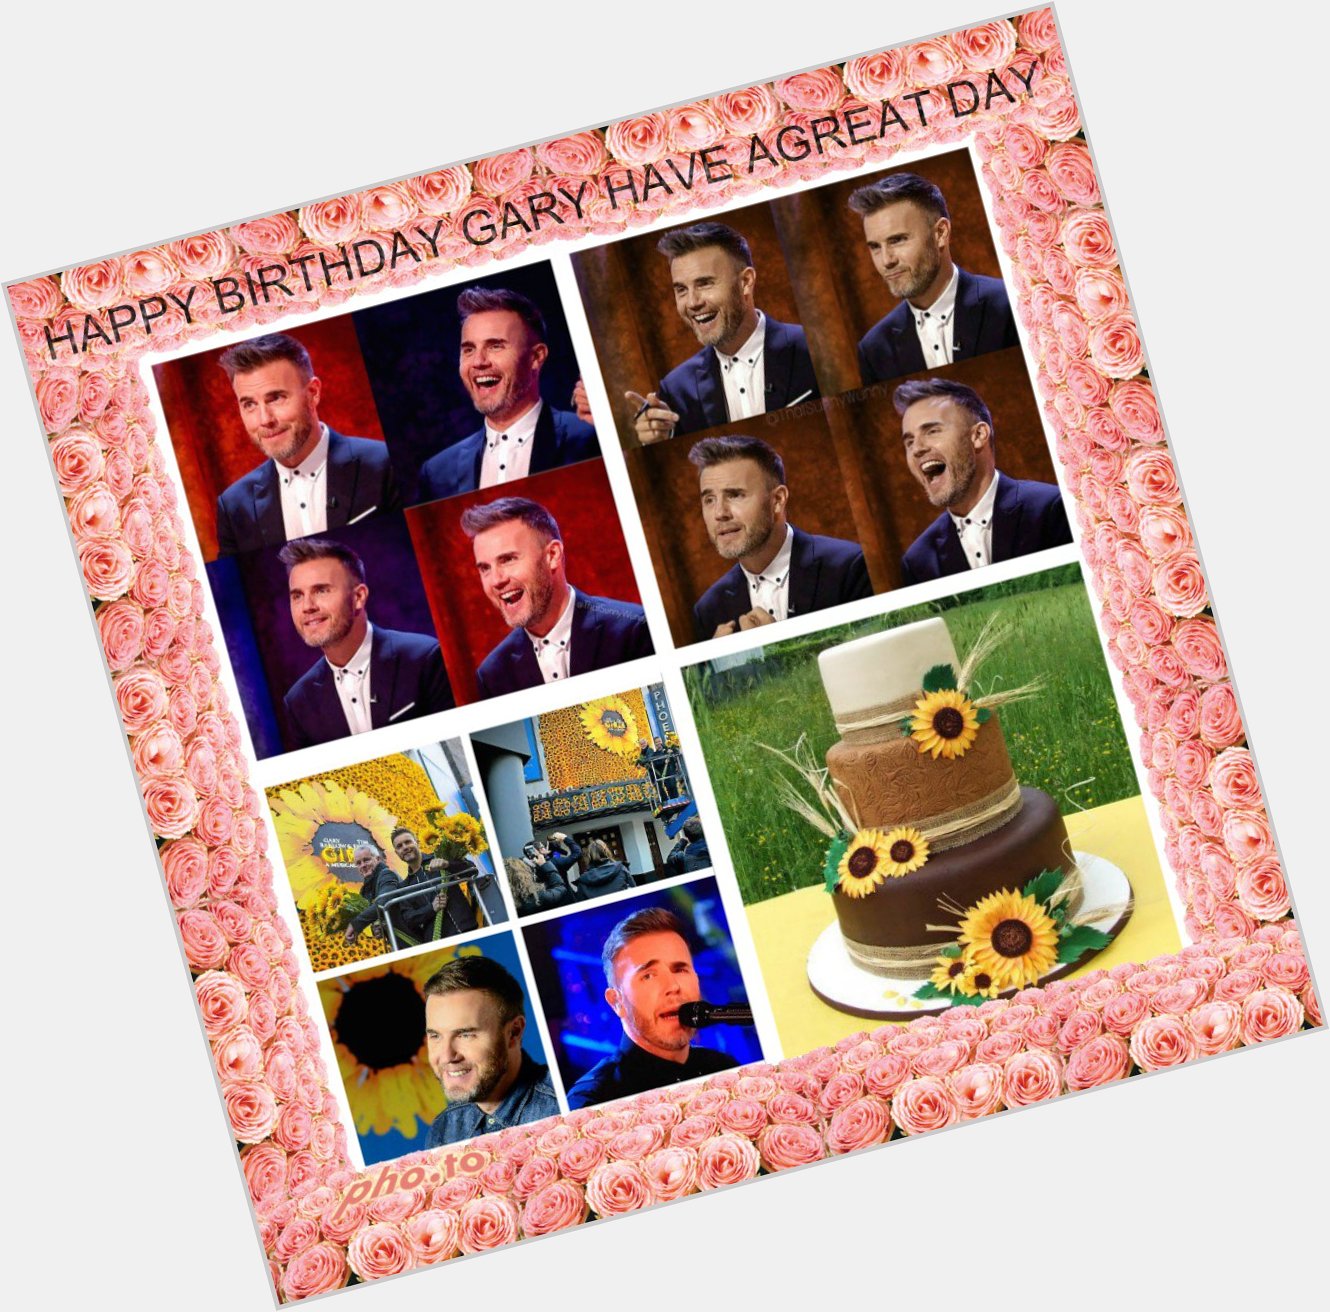  HAPPY 46TH BIRTHDAY GARY BARLOW HAVE A GREAT DAY AND SENDING HUGS       